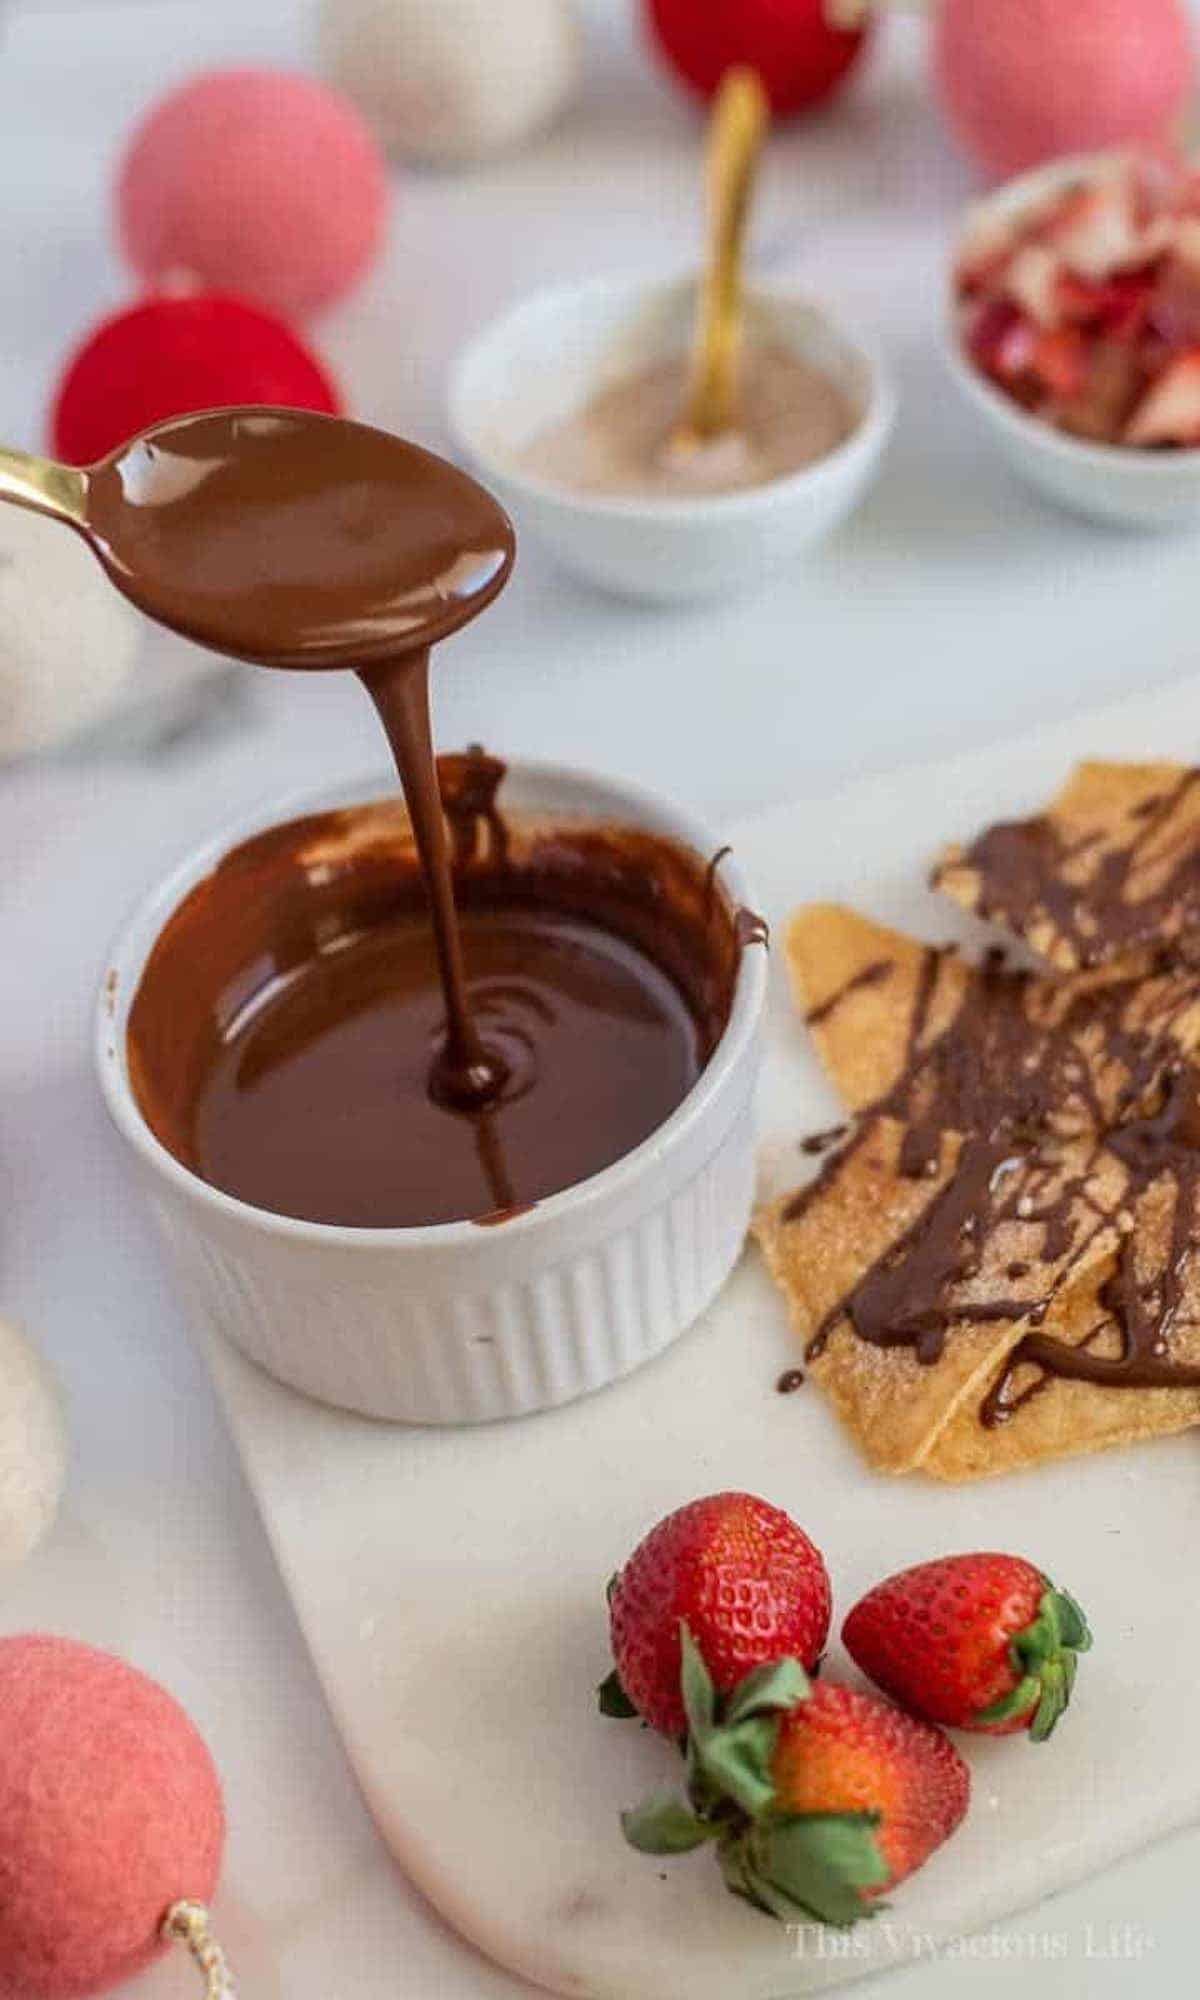 Vegan chocolate sauce on a spoon and in a bowl